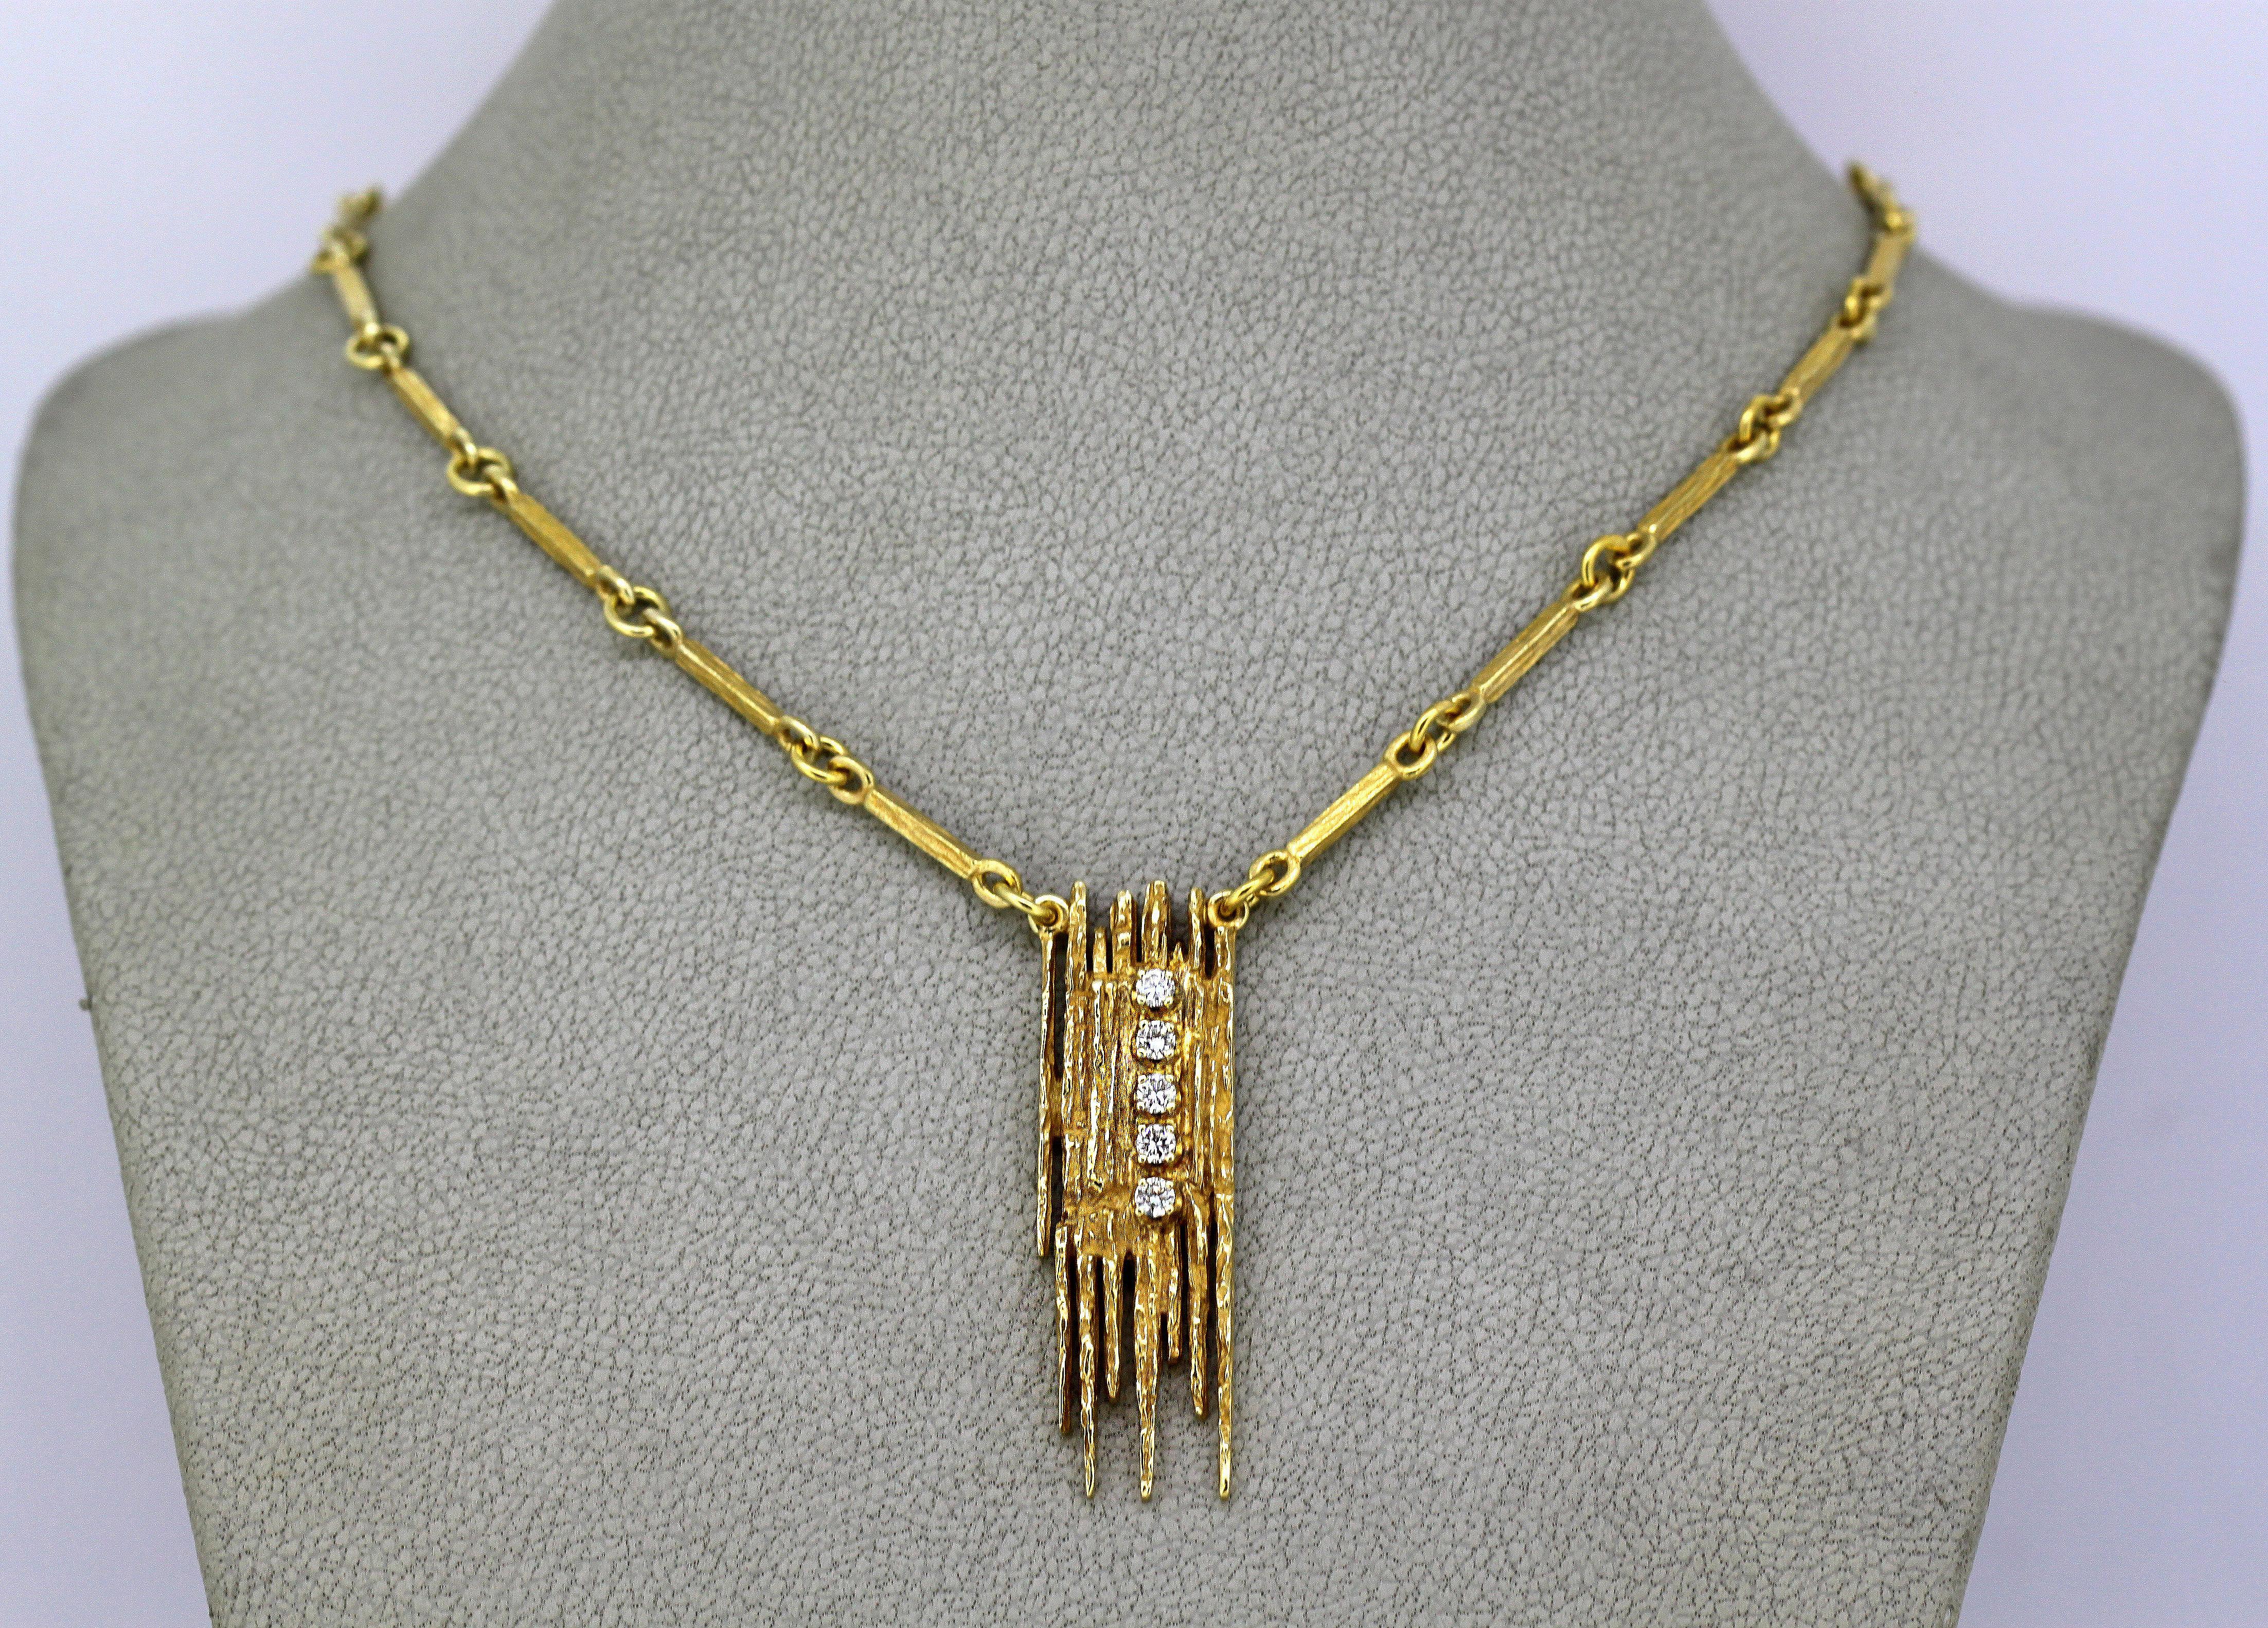 Vintage 18k yellow gold ladies necklace with pendant & diamonds. 
Made in 1970's 
Hallmarked 750. 

Approx Dimensions - 
Necklace Length : 42 cm 
Necklace Width : 0.3 cm 
Pendant Size : 3.8 x 1.2 cm 
Weight : 21 grams 

Diamonds - 
Cut : Round